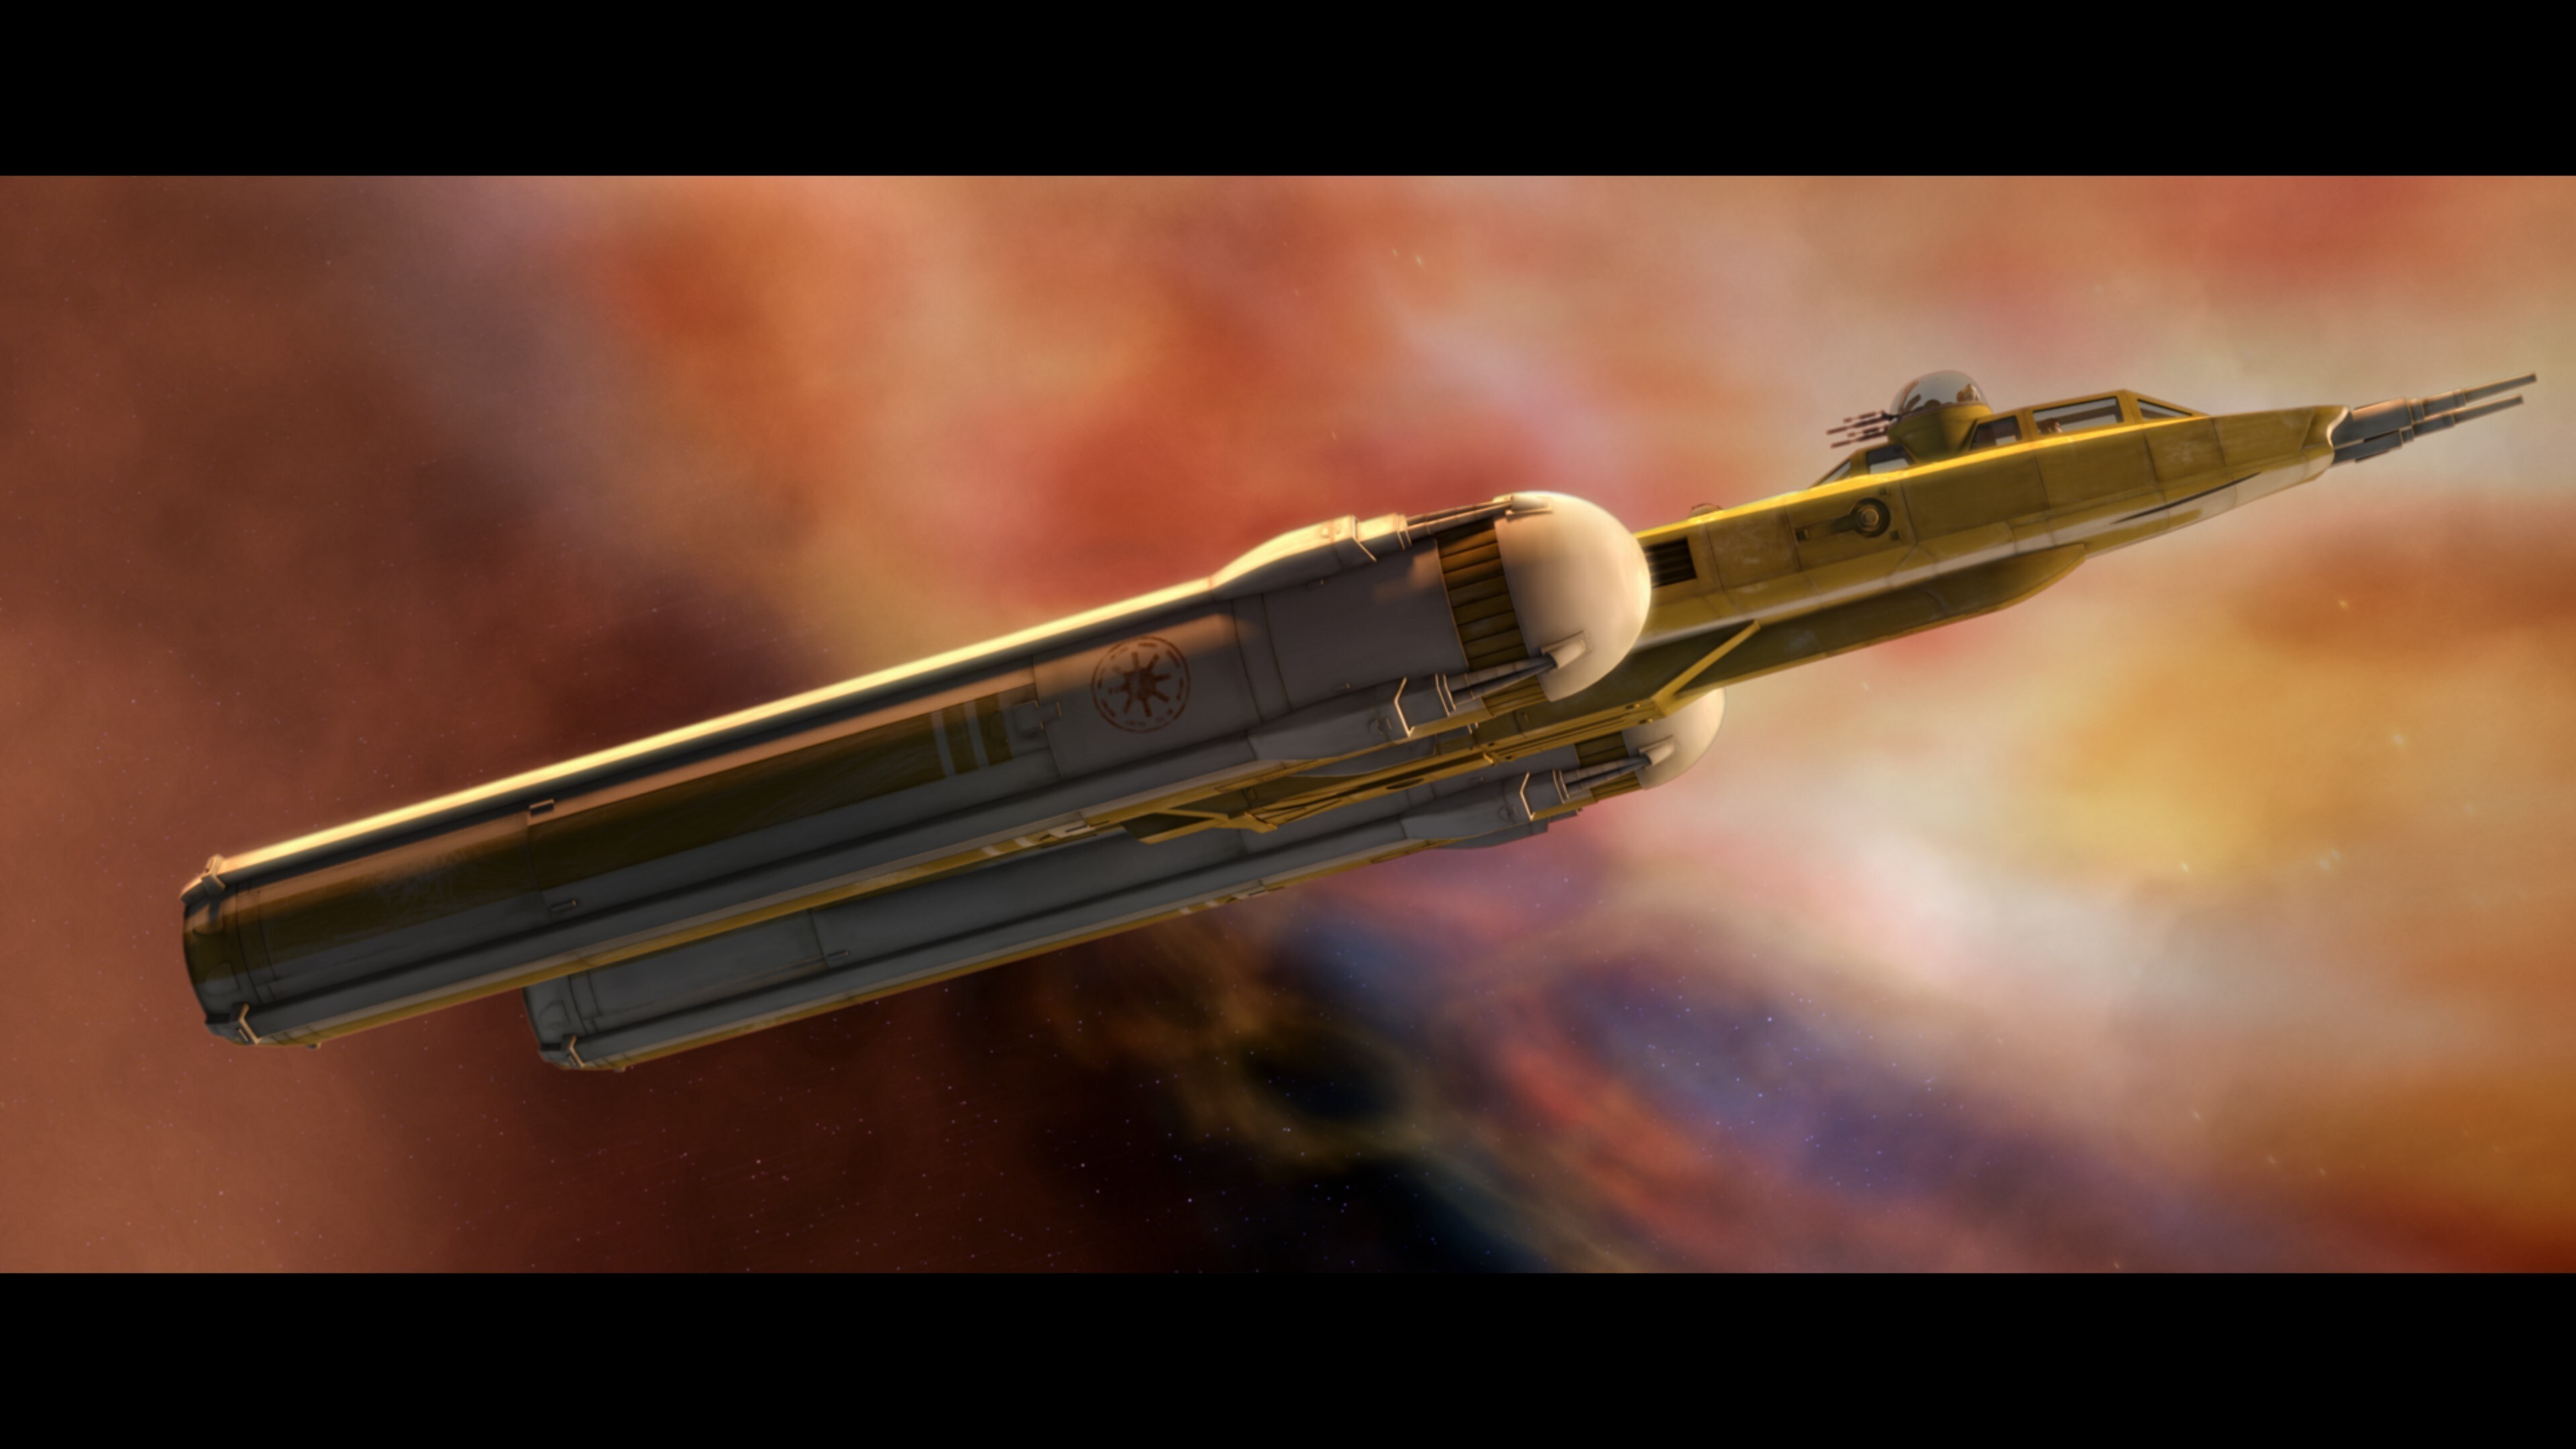 The look of the Clone Wars-era Y-wing bombers stems directly from the design of the original Y-wi...